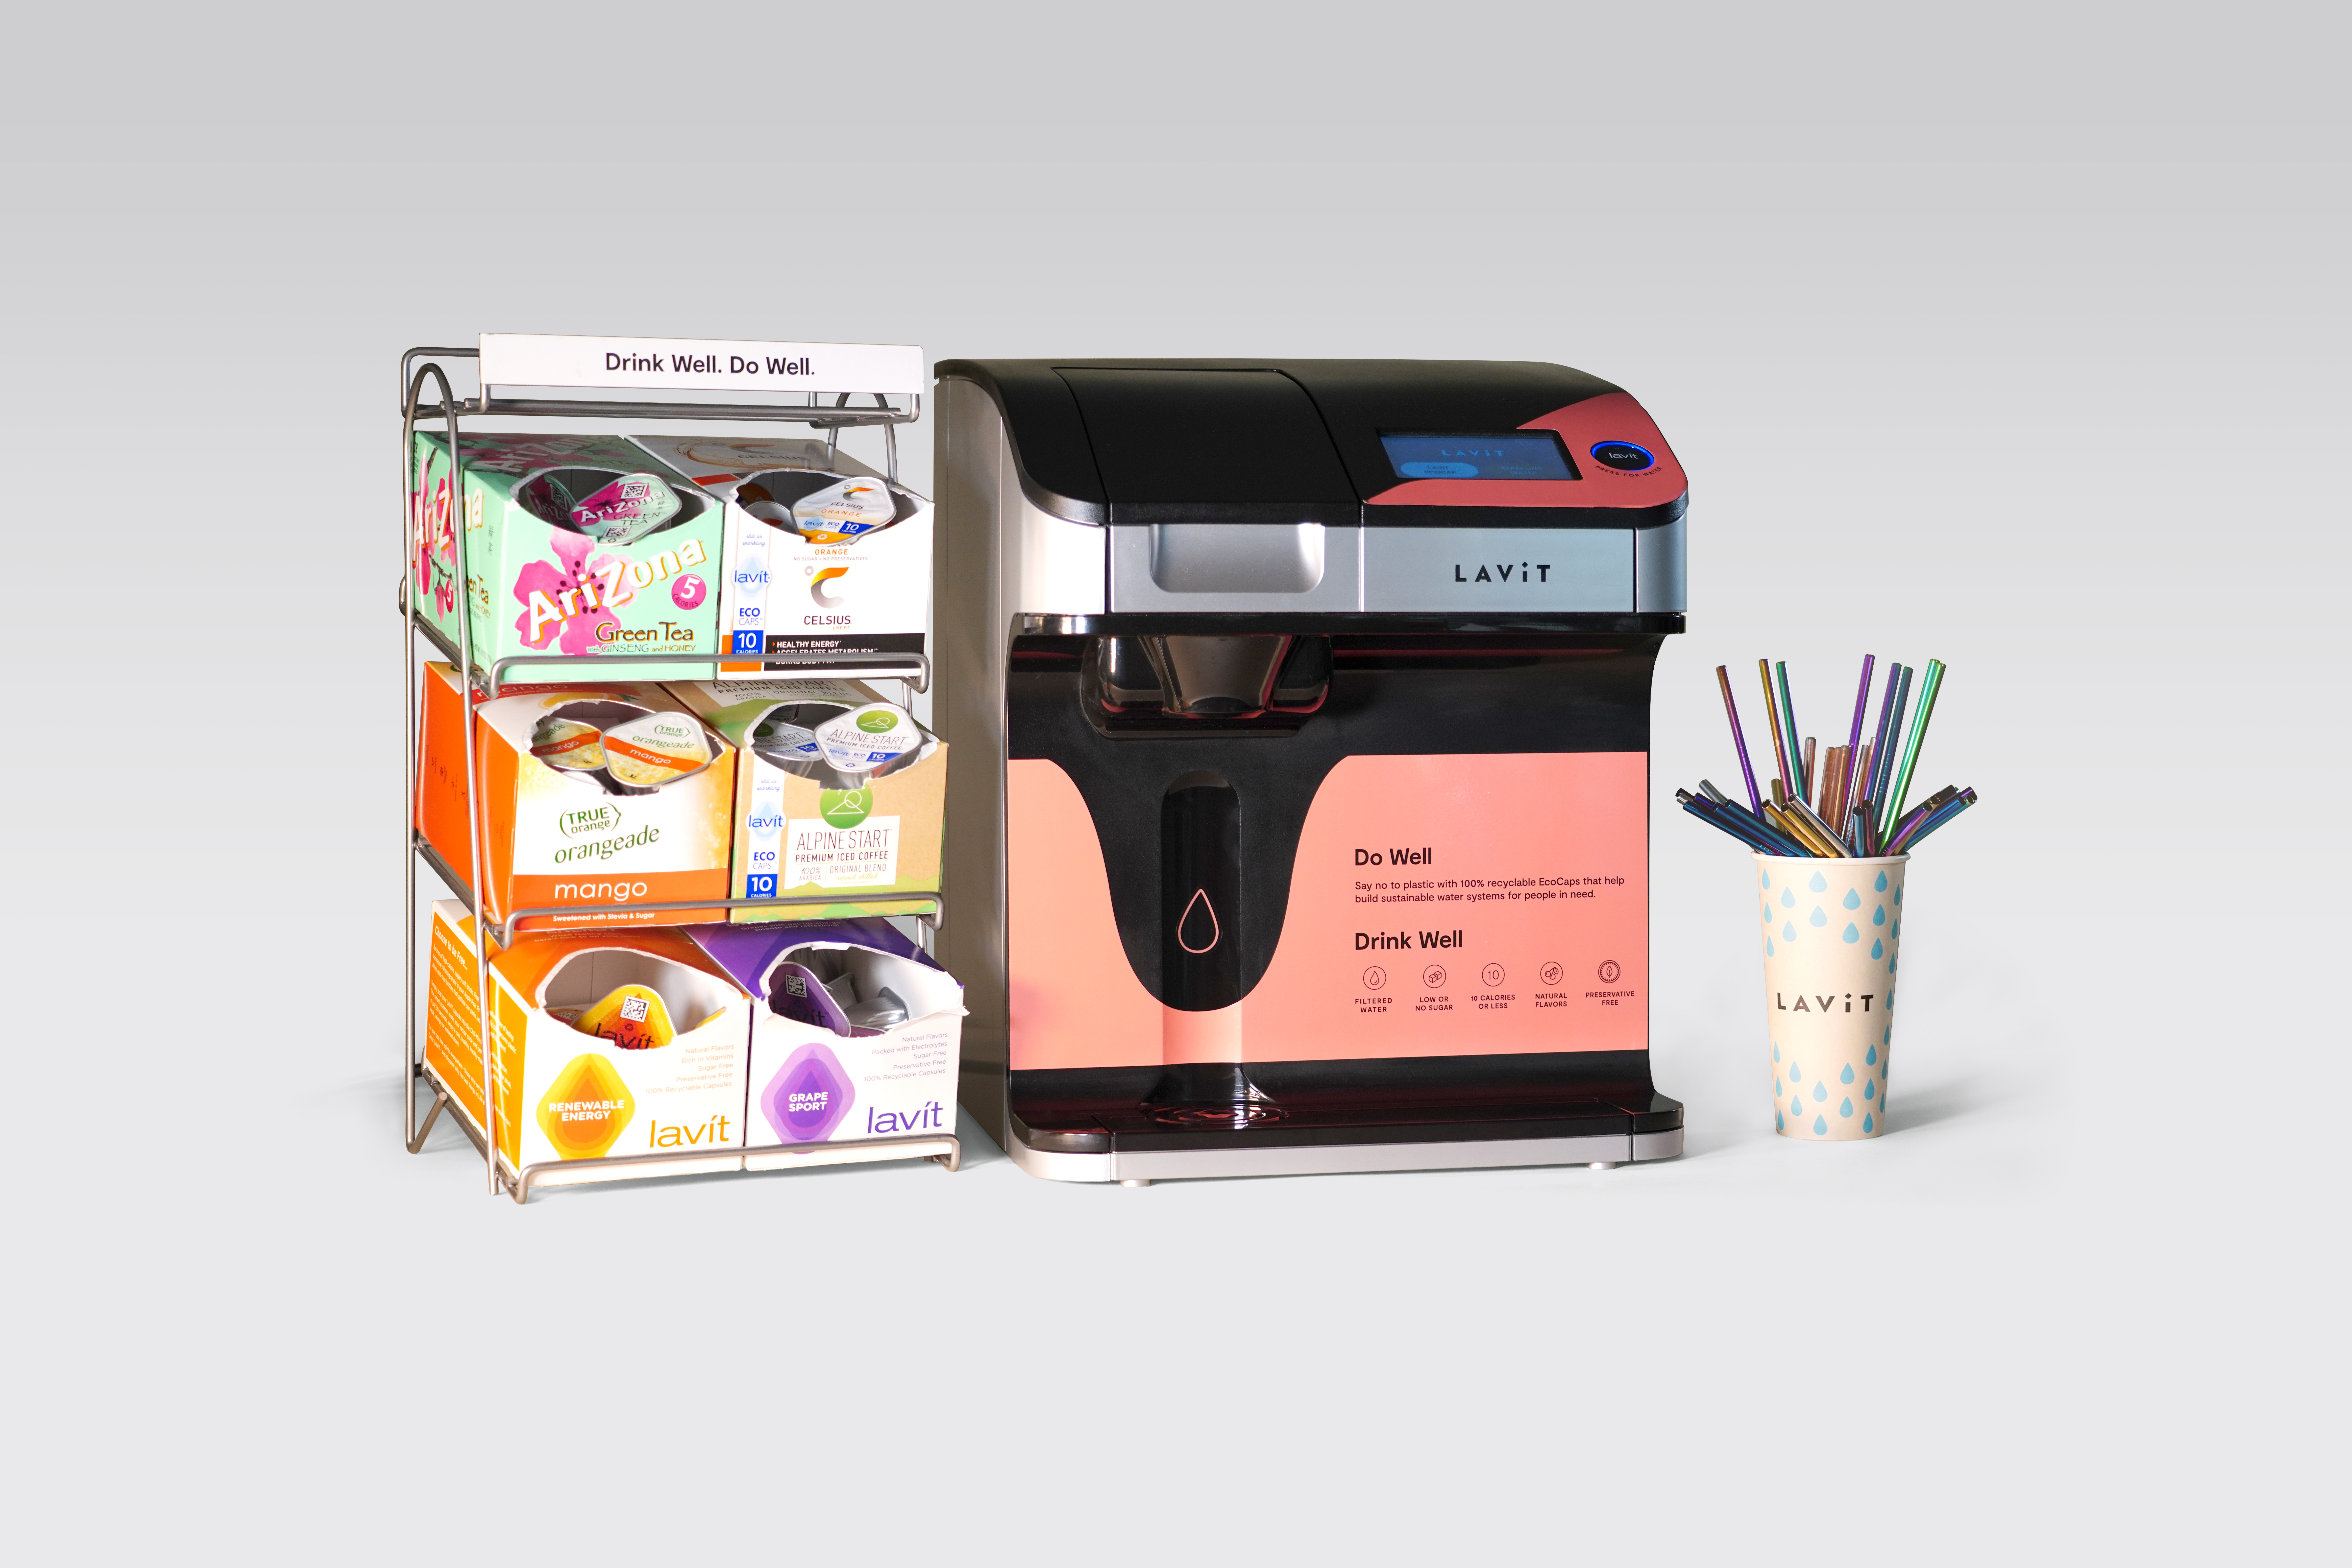 Space-Saving Beverage System Lavit Raises $7.5 million  in Series A, Expanding Distribution and Flavor Selection 